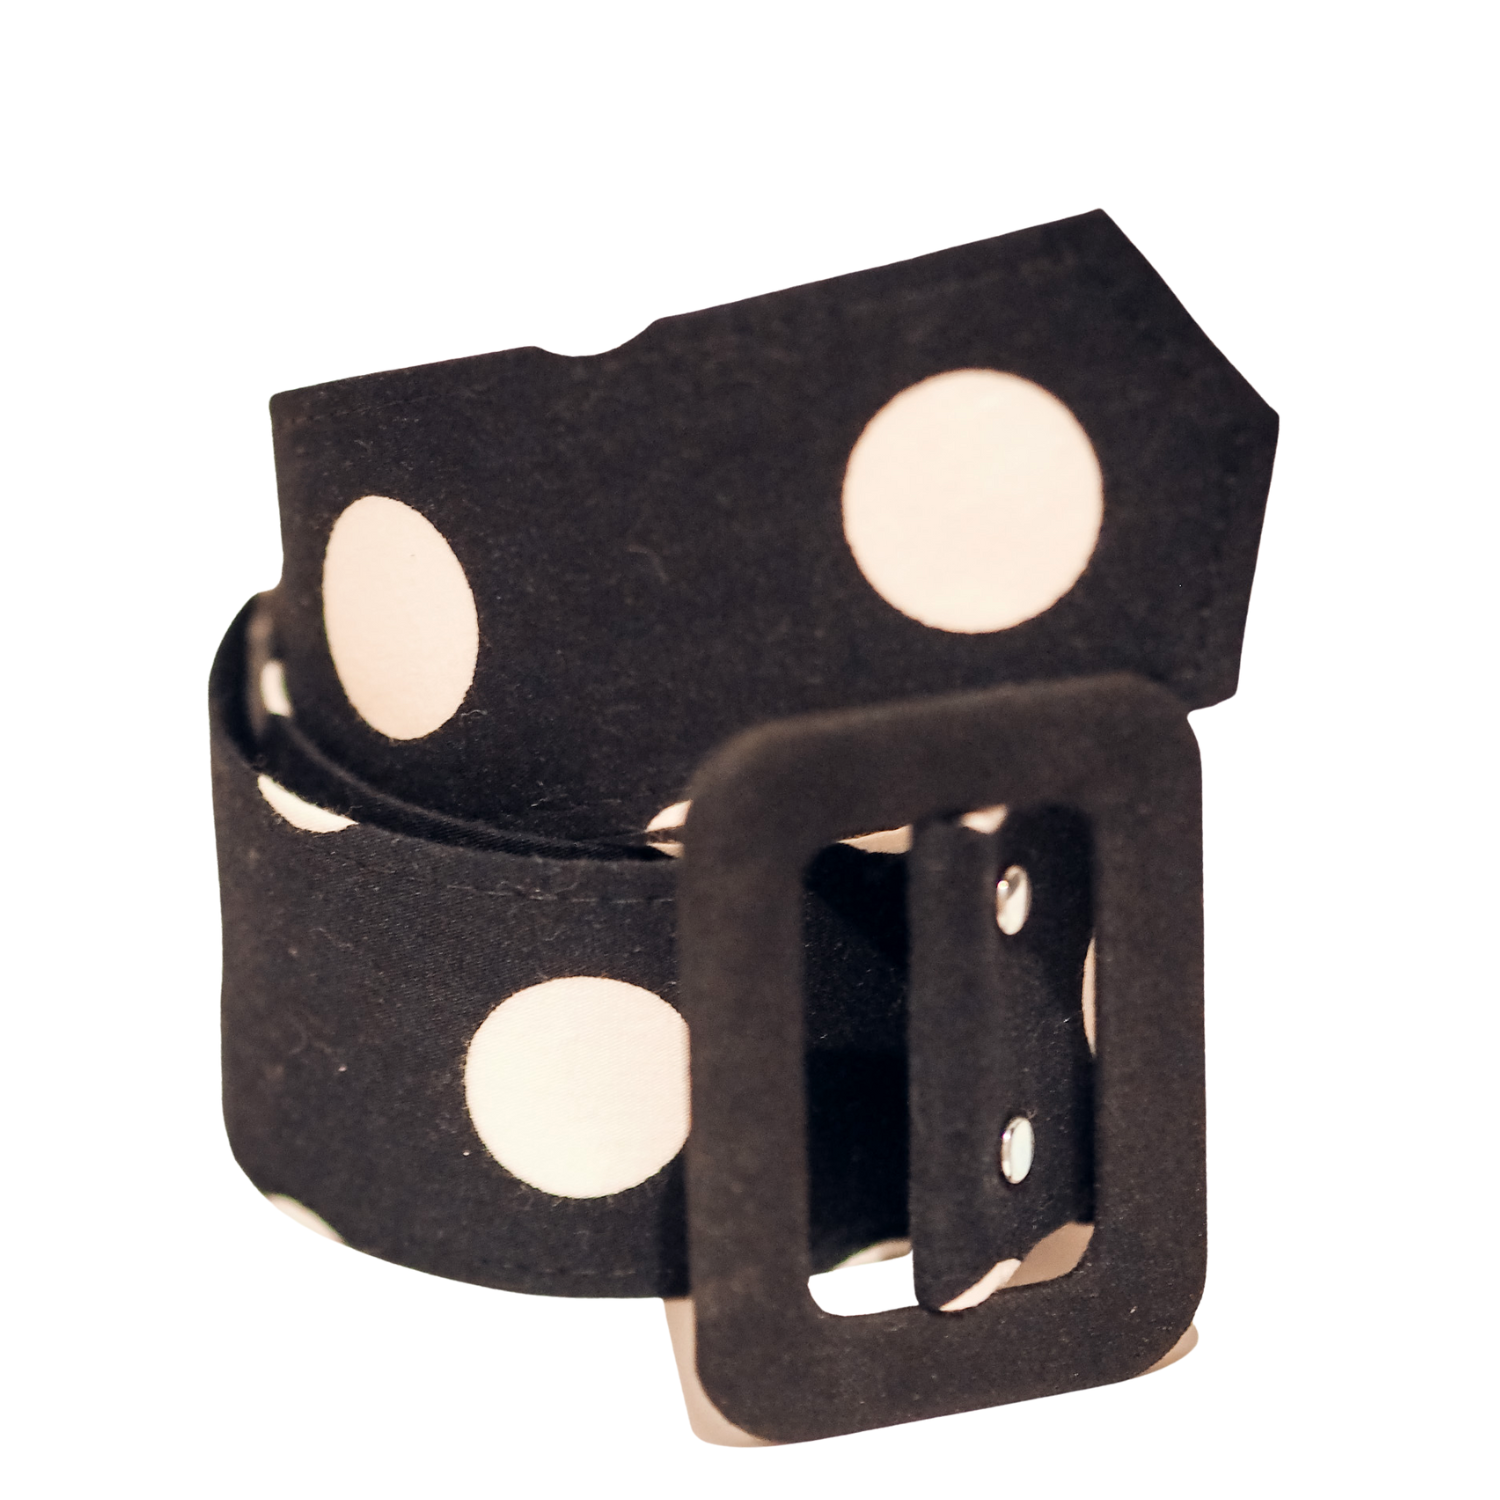 POLKA DOT BELT MADE FROM RECYCLED FABRIC